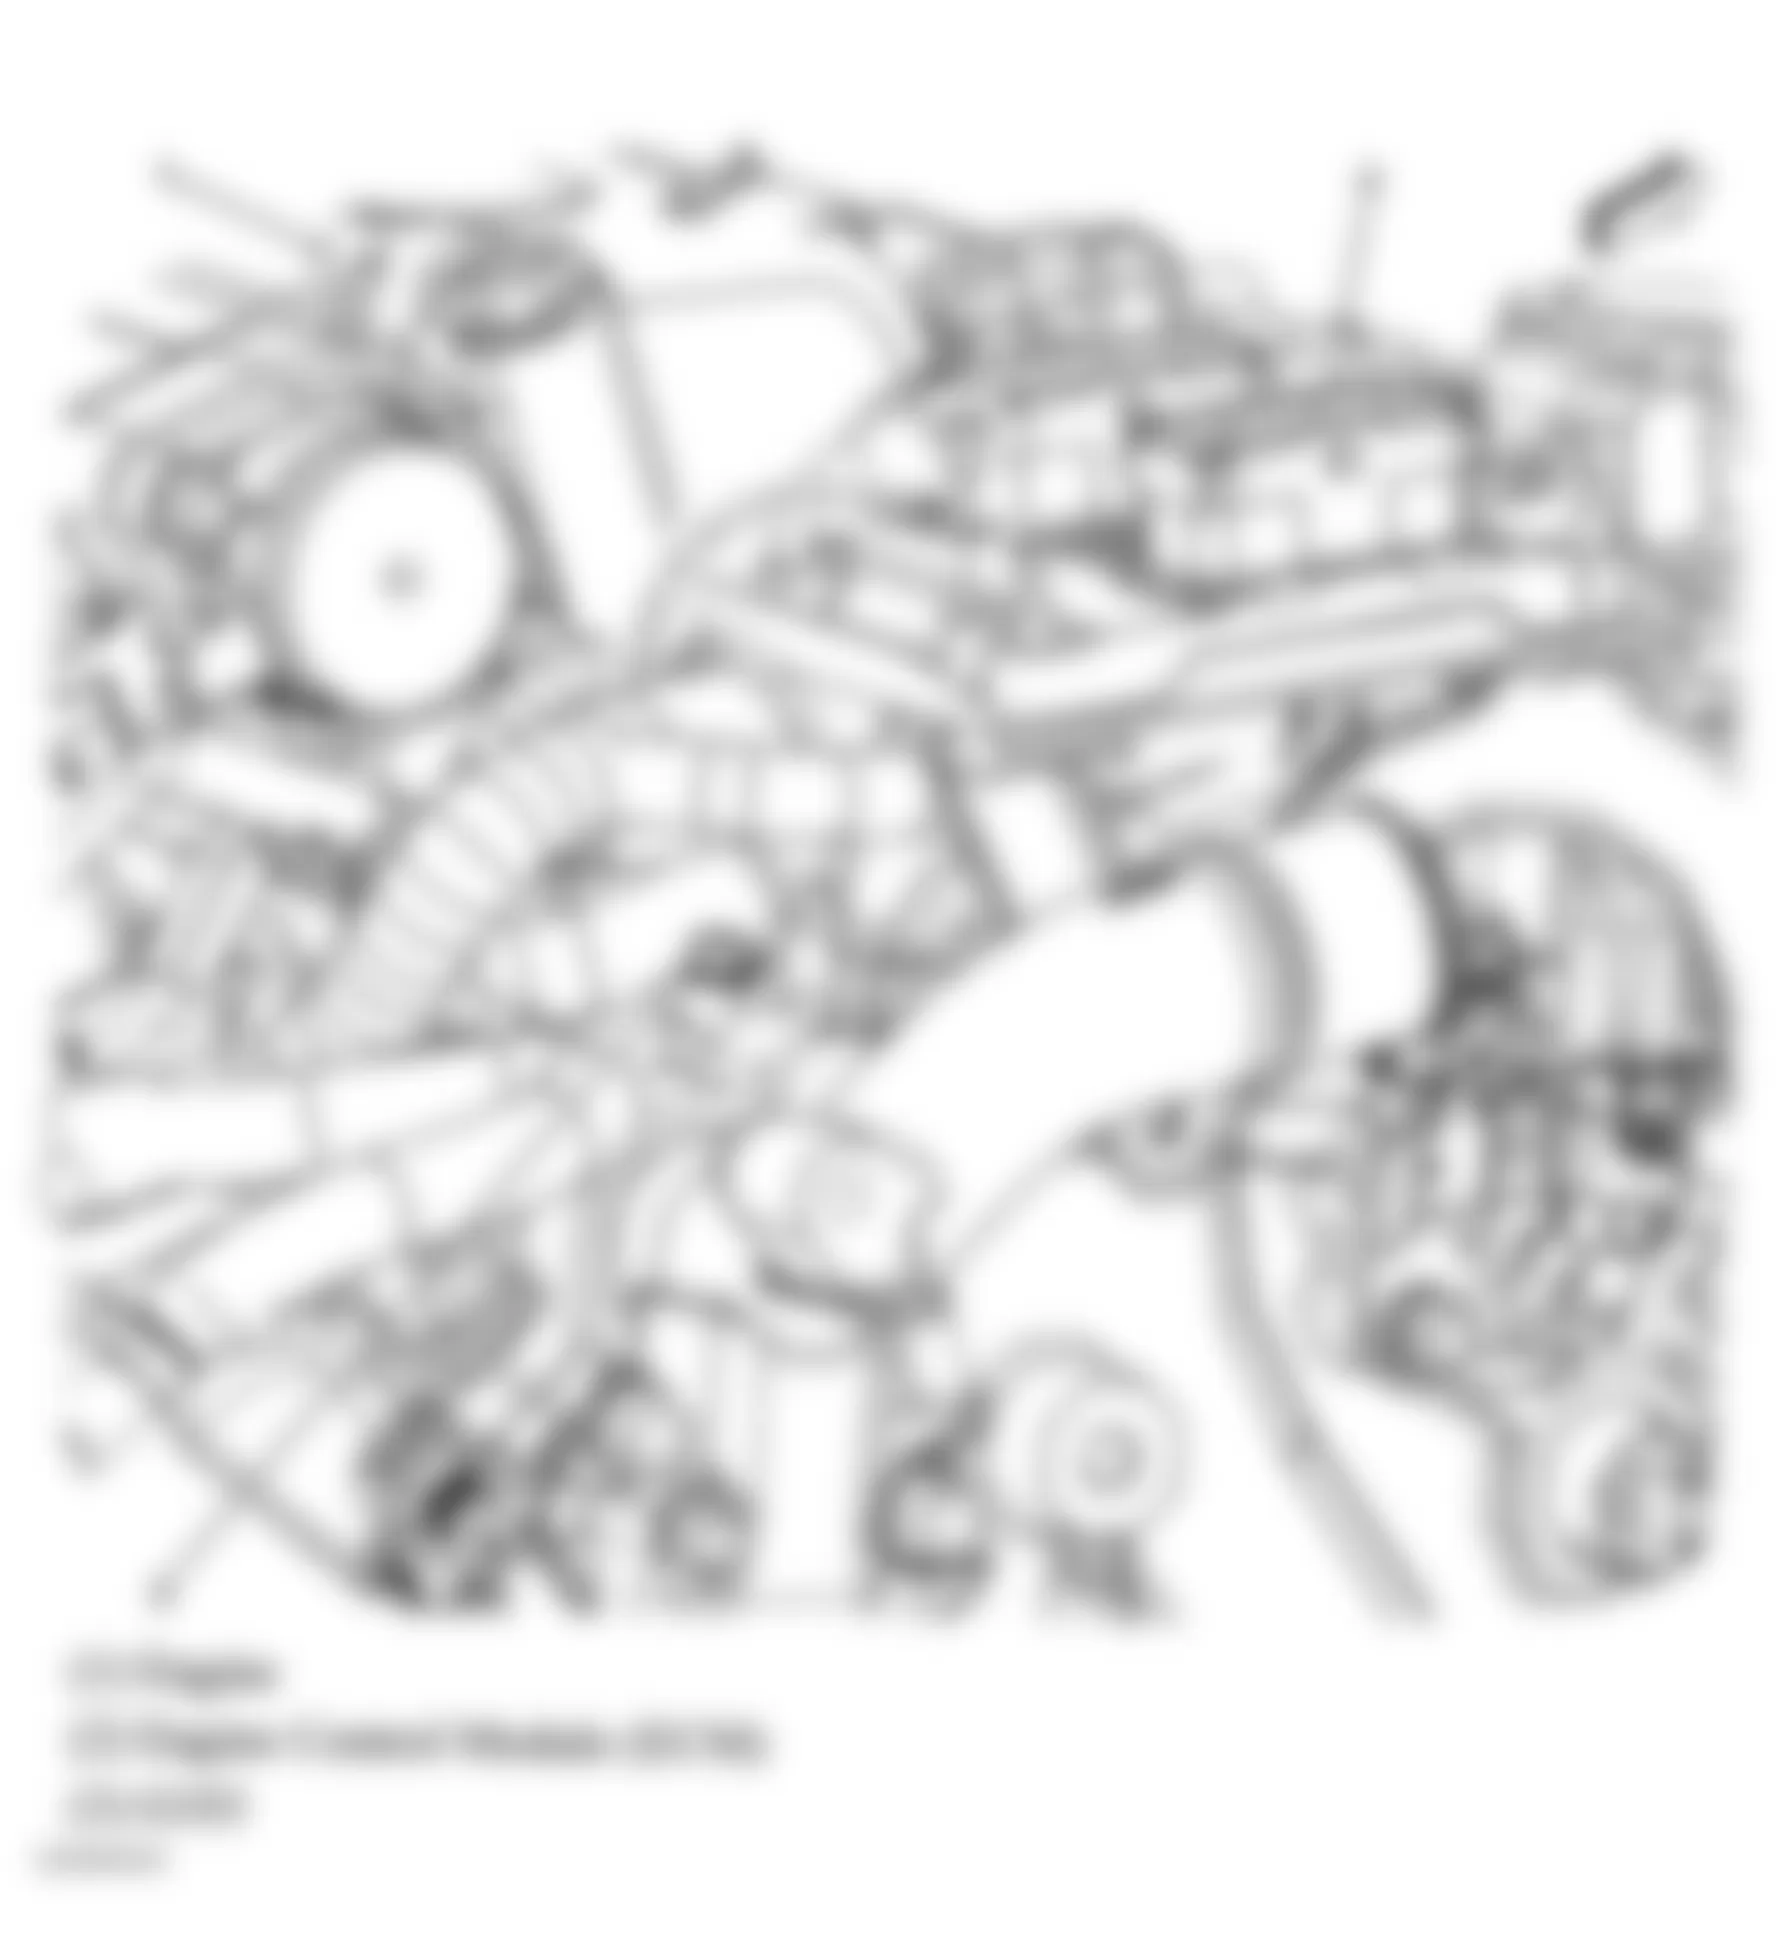 Buick Allure CX 2006 - Component Locations -  Engine Assembly (3.6L)